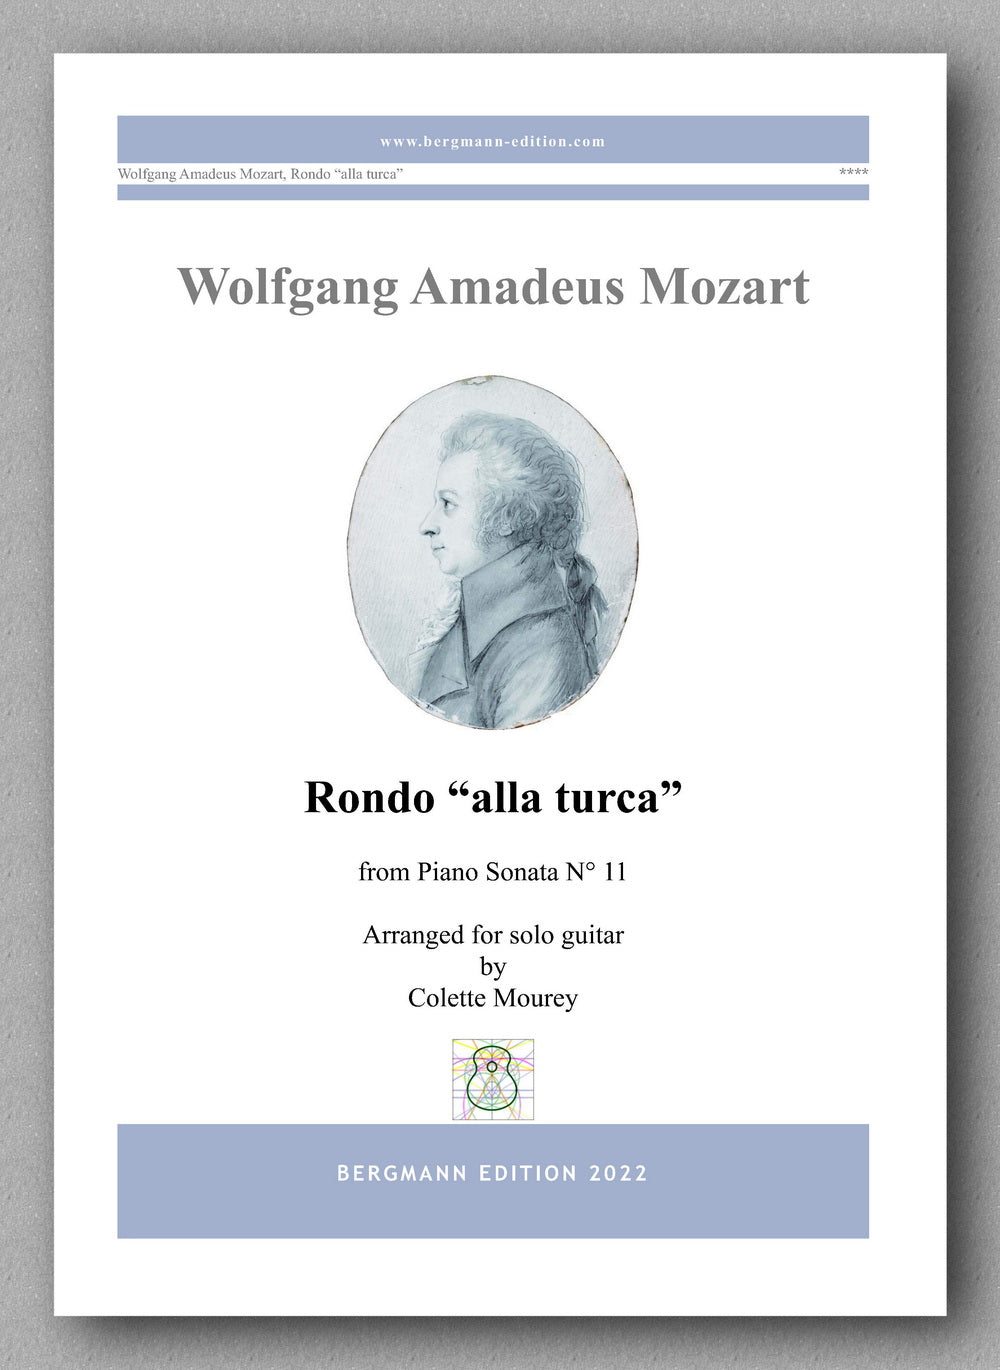 Wolfgang Amadeus Mozart,  Rondo “alla turca” - preview of the cover